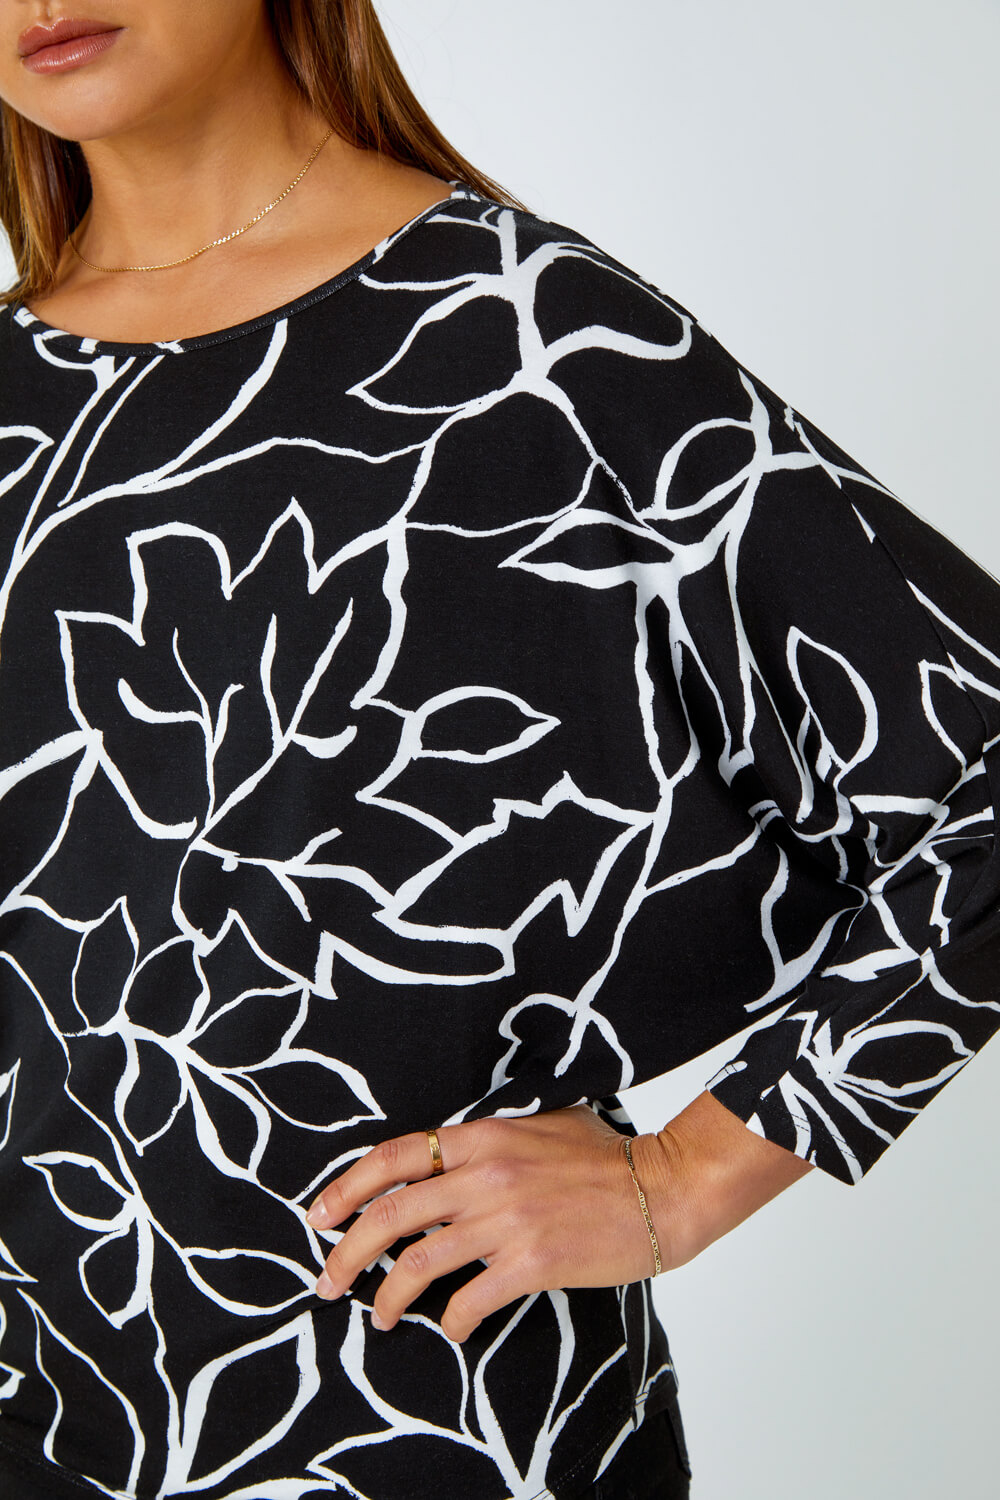 Black Contrast Floral Linear Print Stretch Top, Image 5 of 5